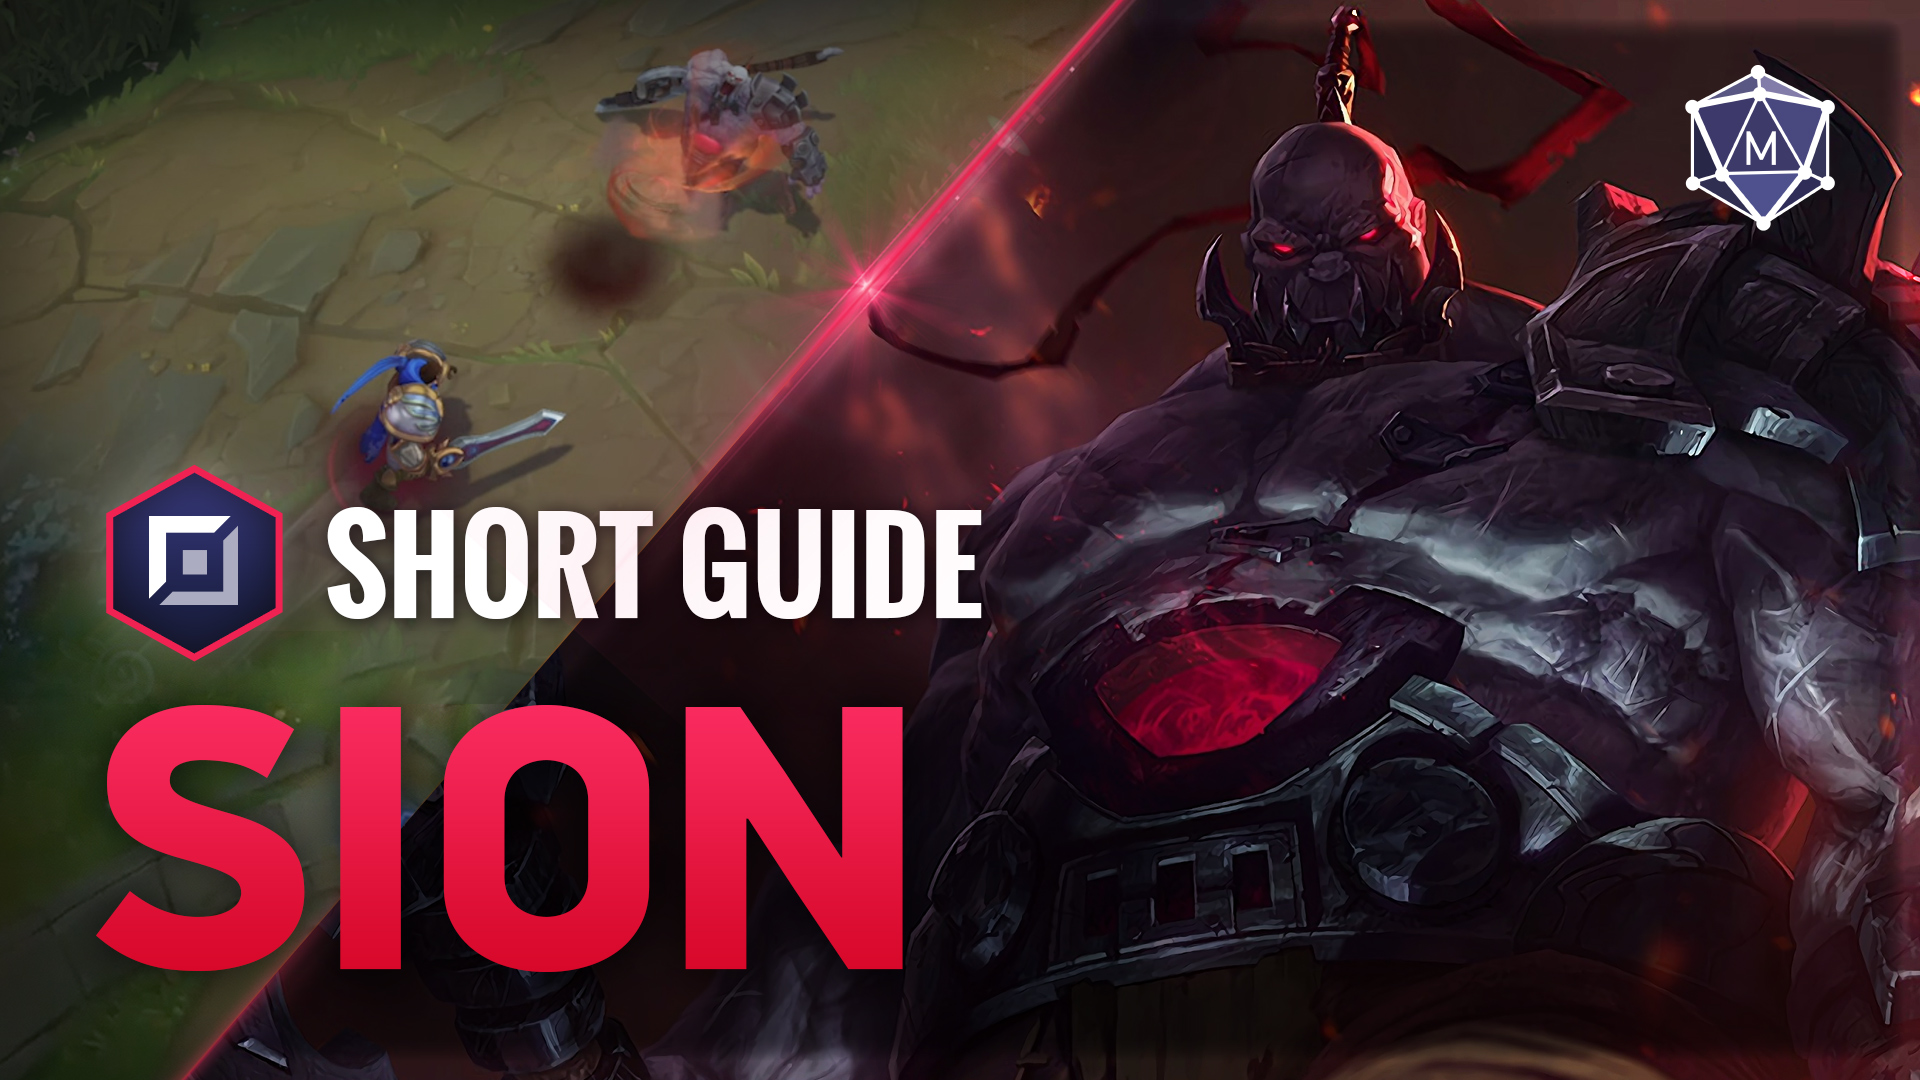 Sion expert guide